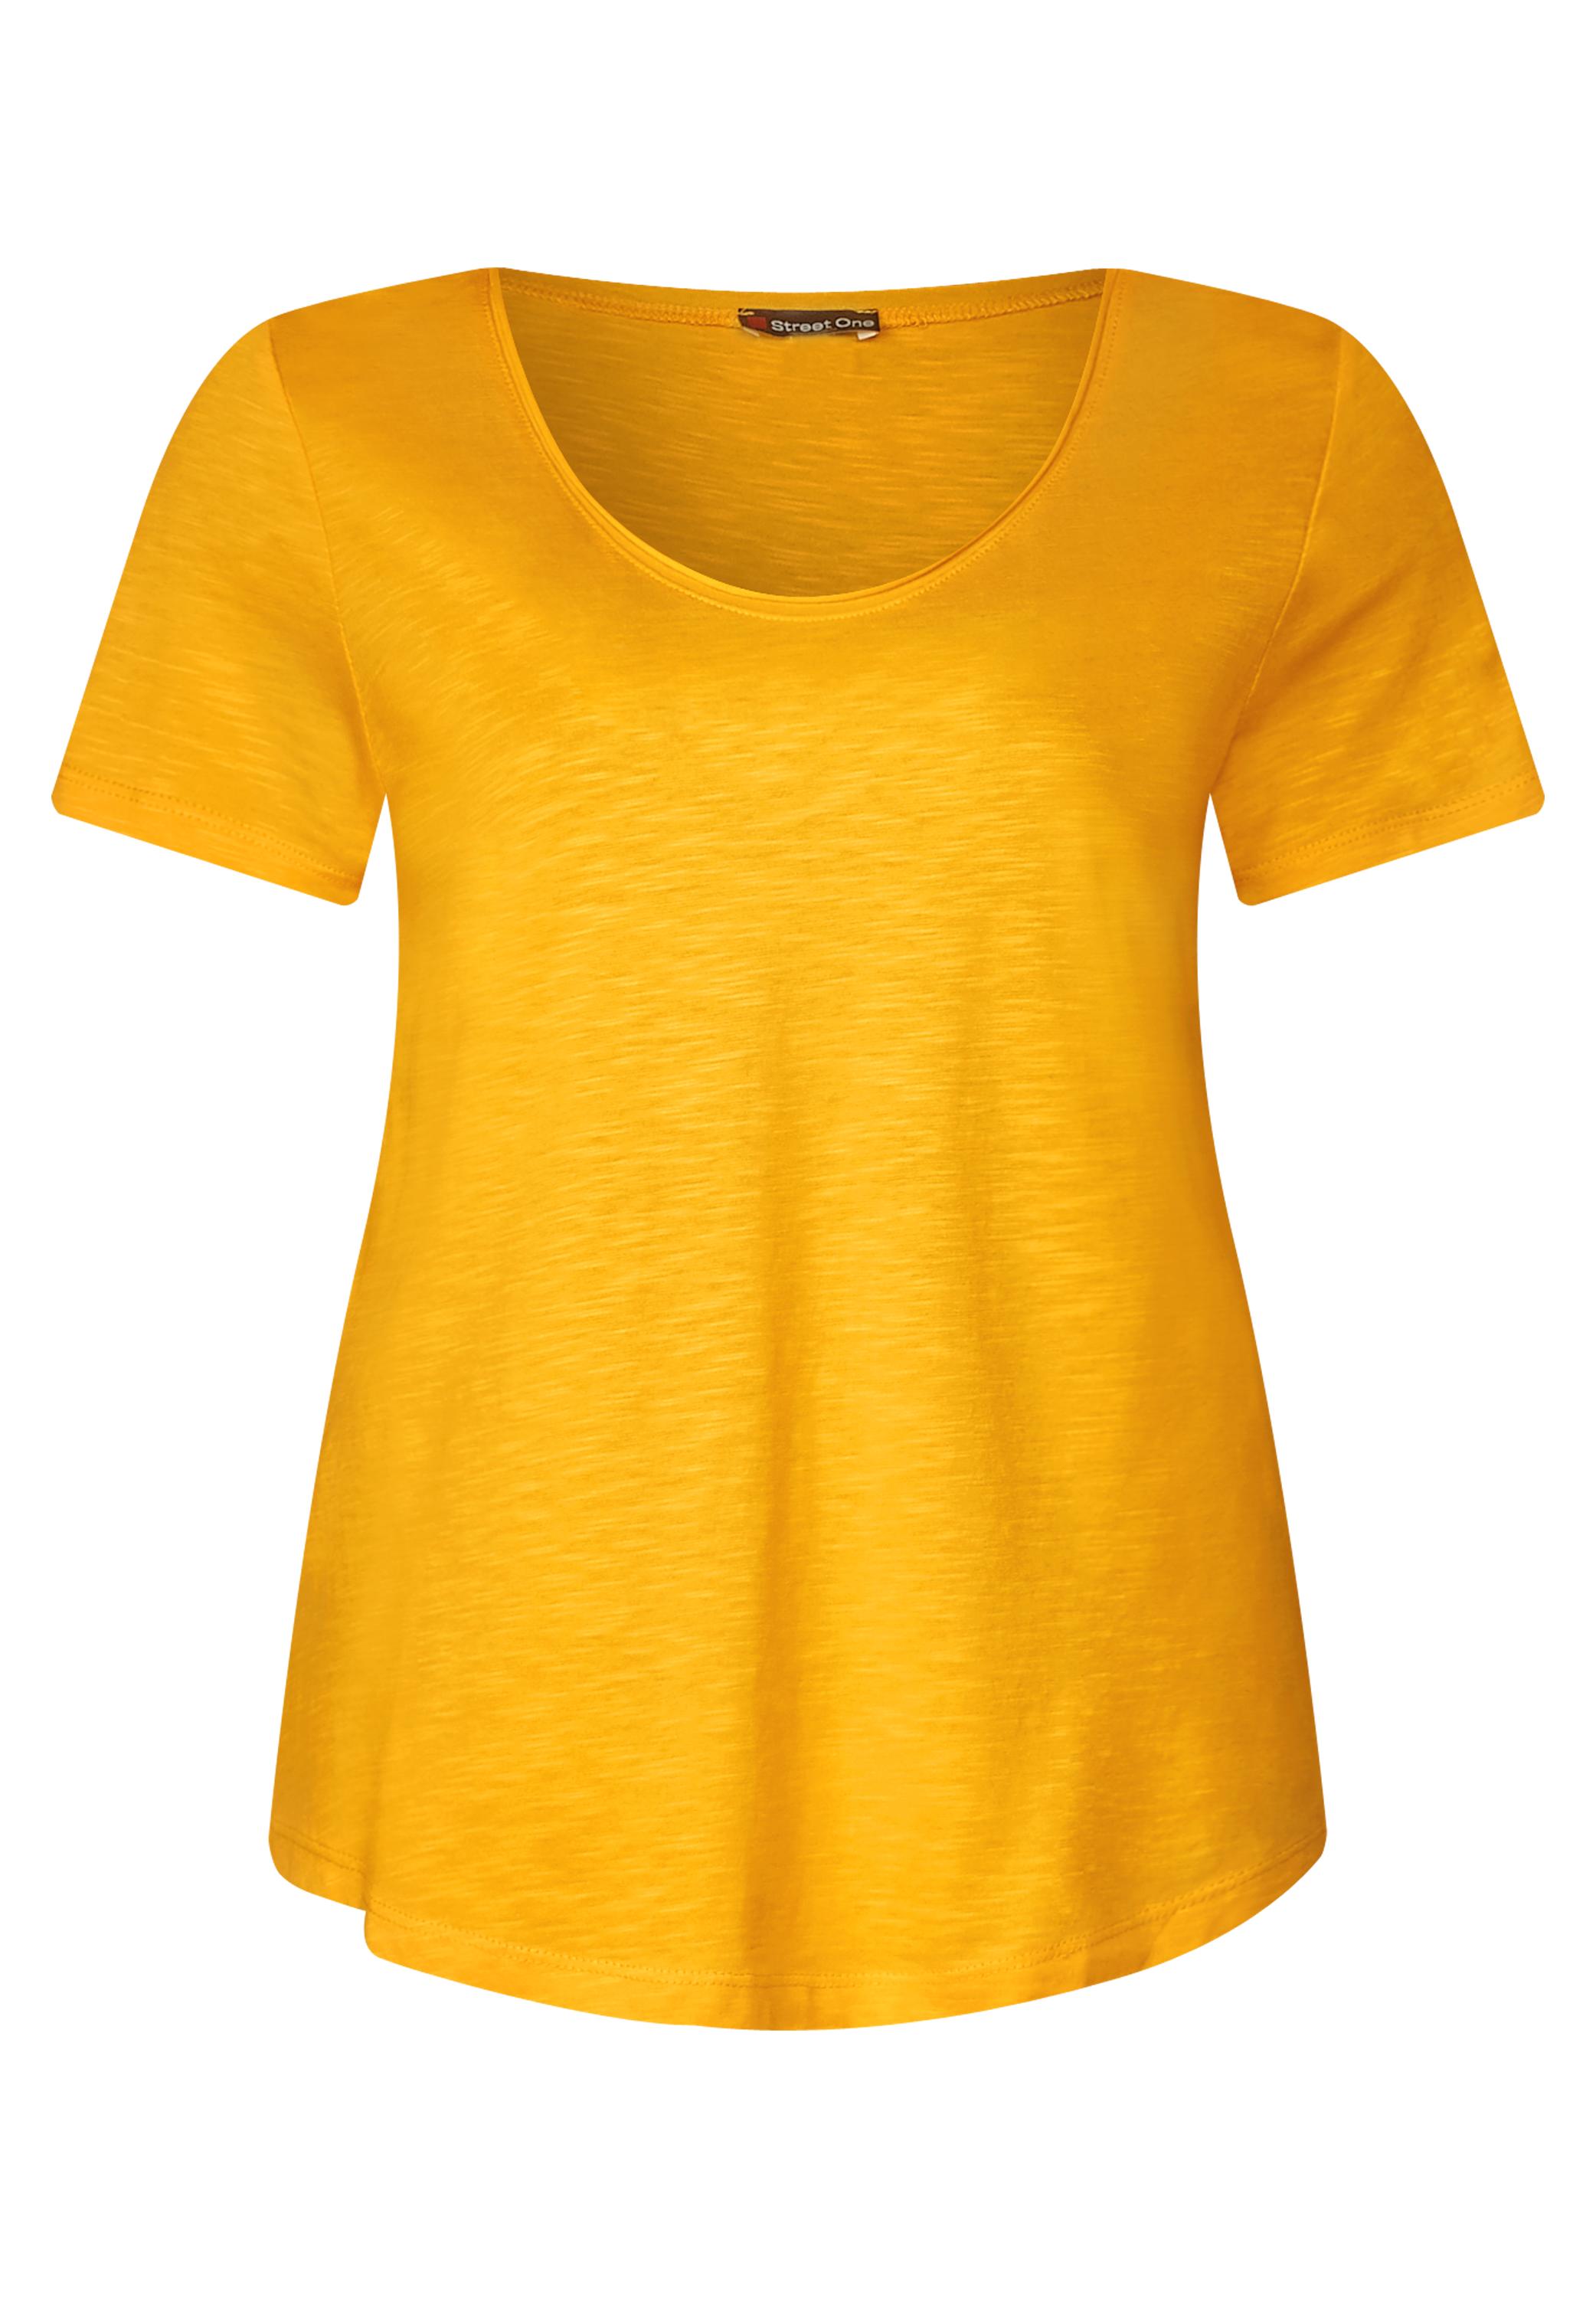 CONCEPT Gerda Clementine T-Shirt Bright One in A313386-11804 - Street Mode